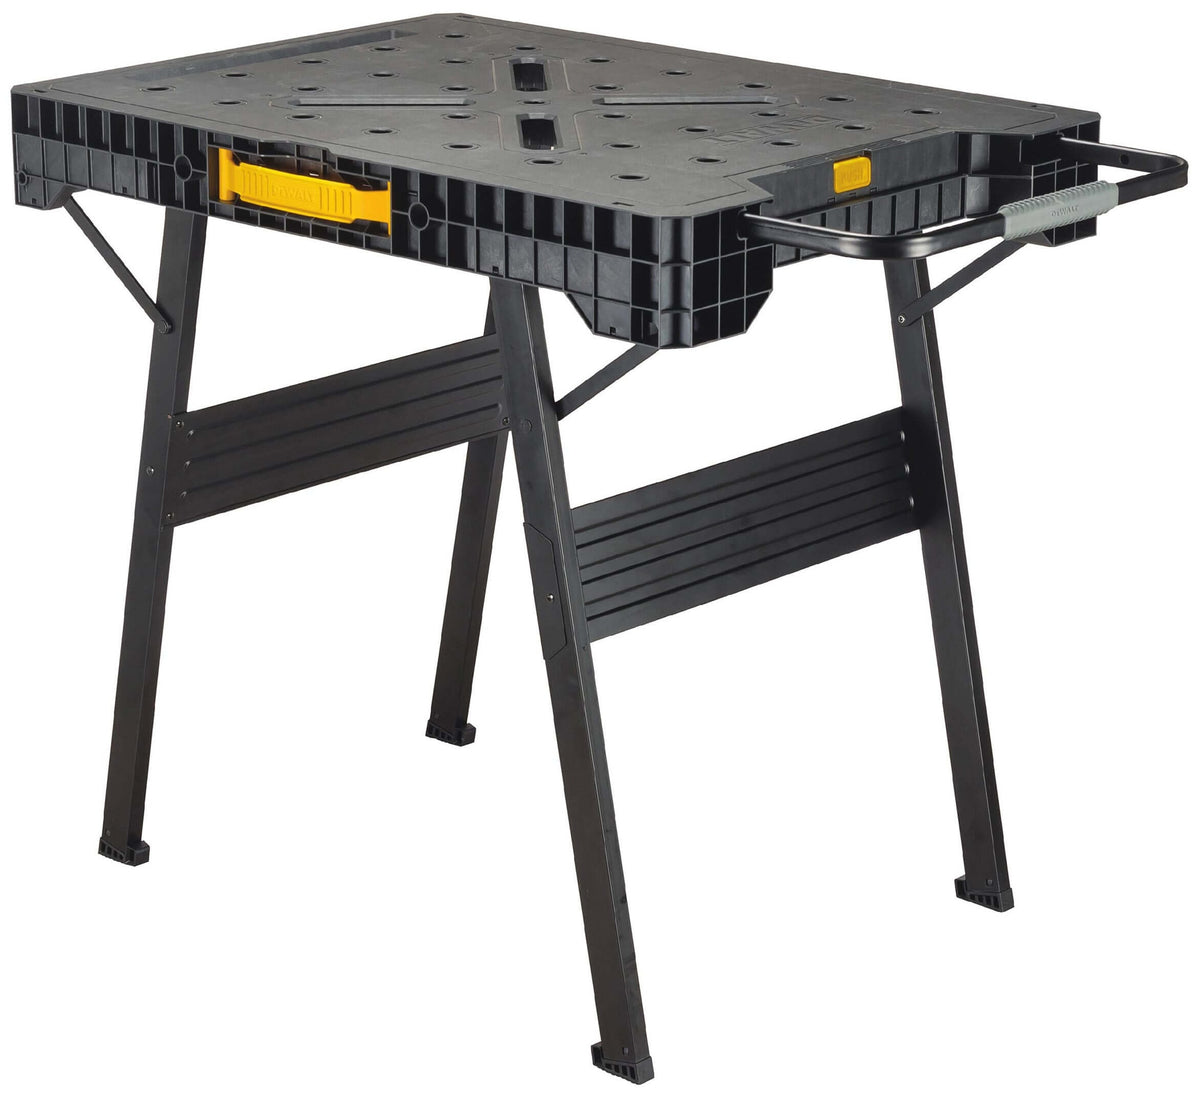 Buy 33 in. folding portable workbench - Online store for safety & organization, workbenches in USA, on sale, low price, discount deals, coupon code